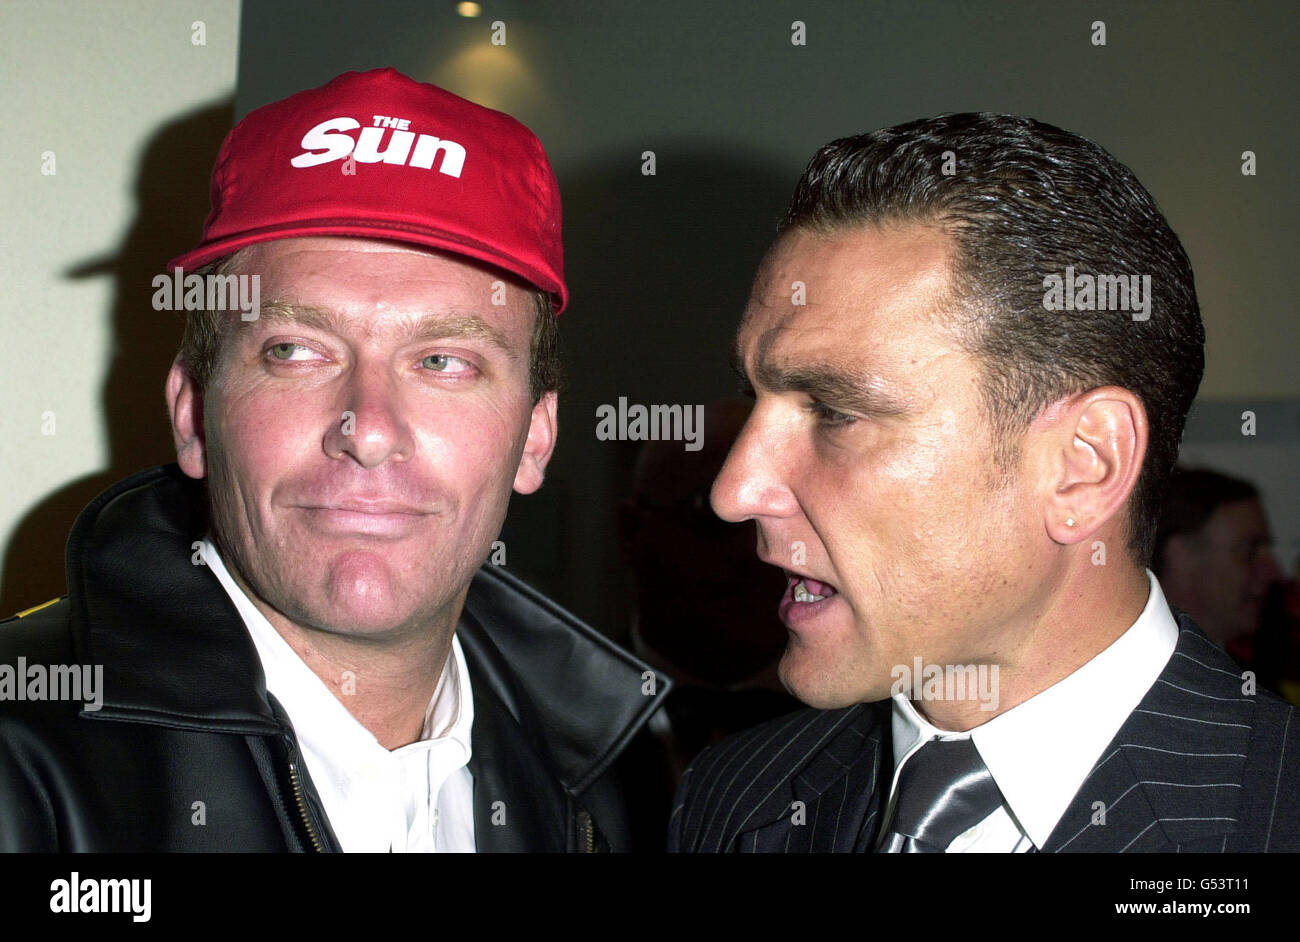 Former footballer turned actor Vinnie Jones (R), who stars in the film, meets Big Brother's Nasty Nick Bateman, while arriving at the premiere of Snatch, at the Odeon Leicester Square, in London. Stock Photo